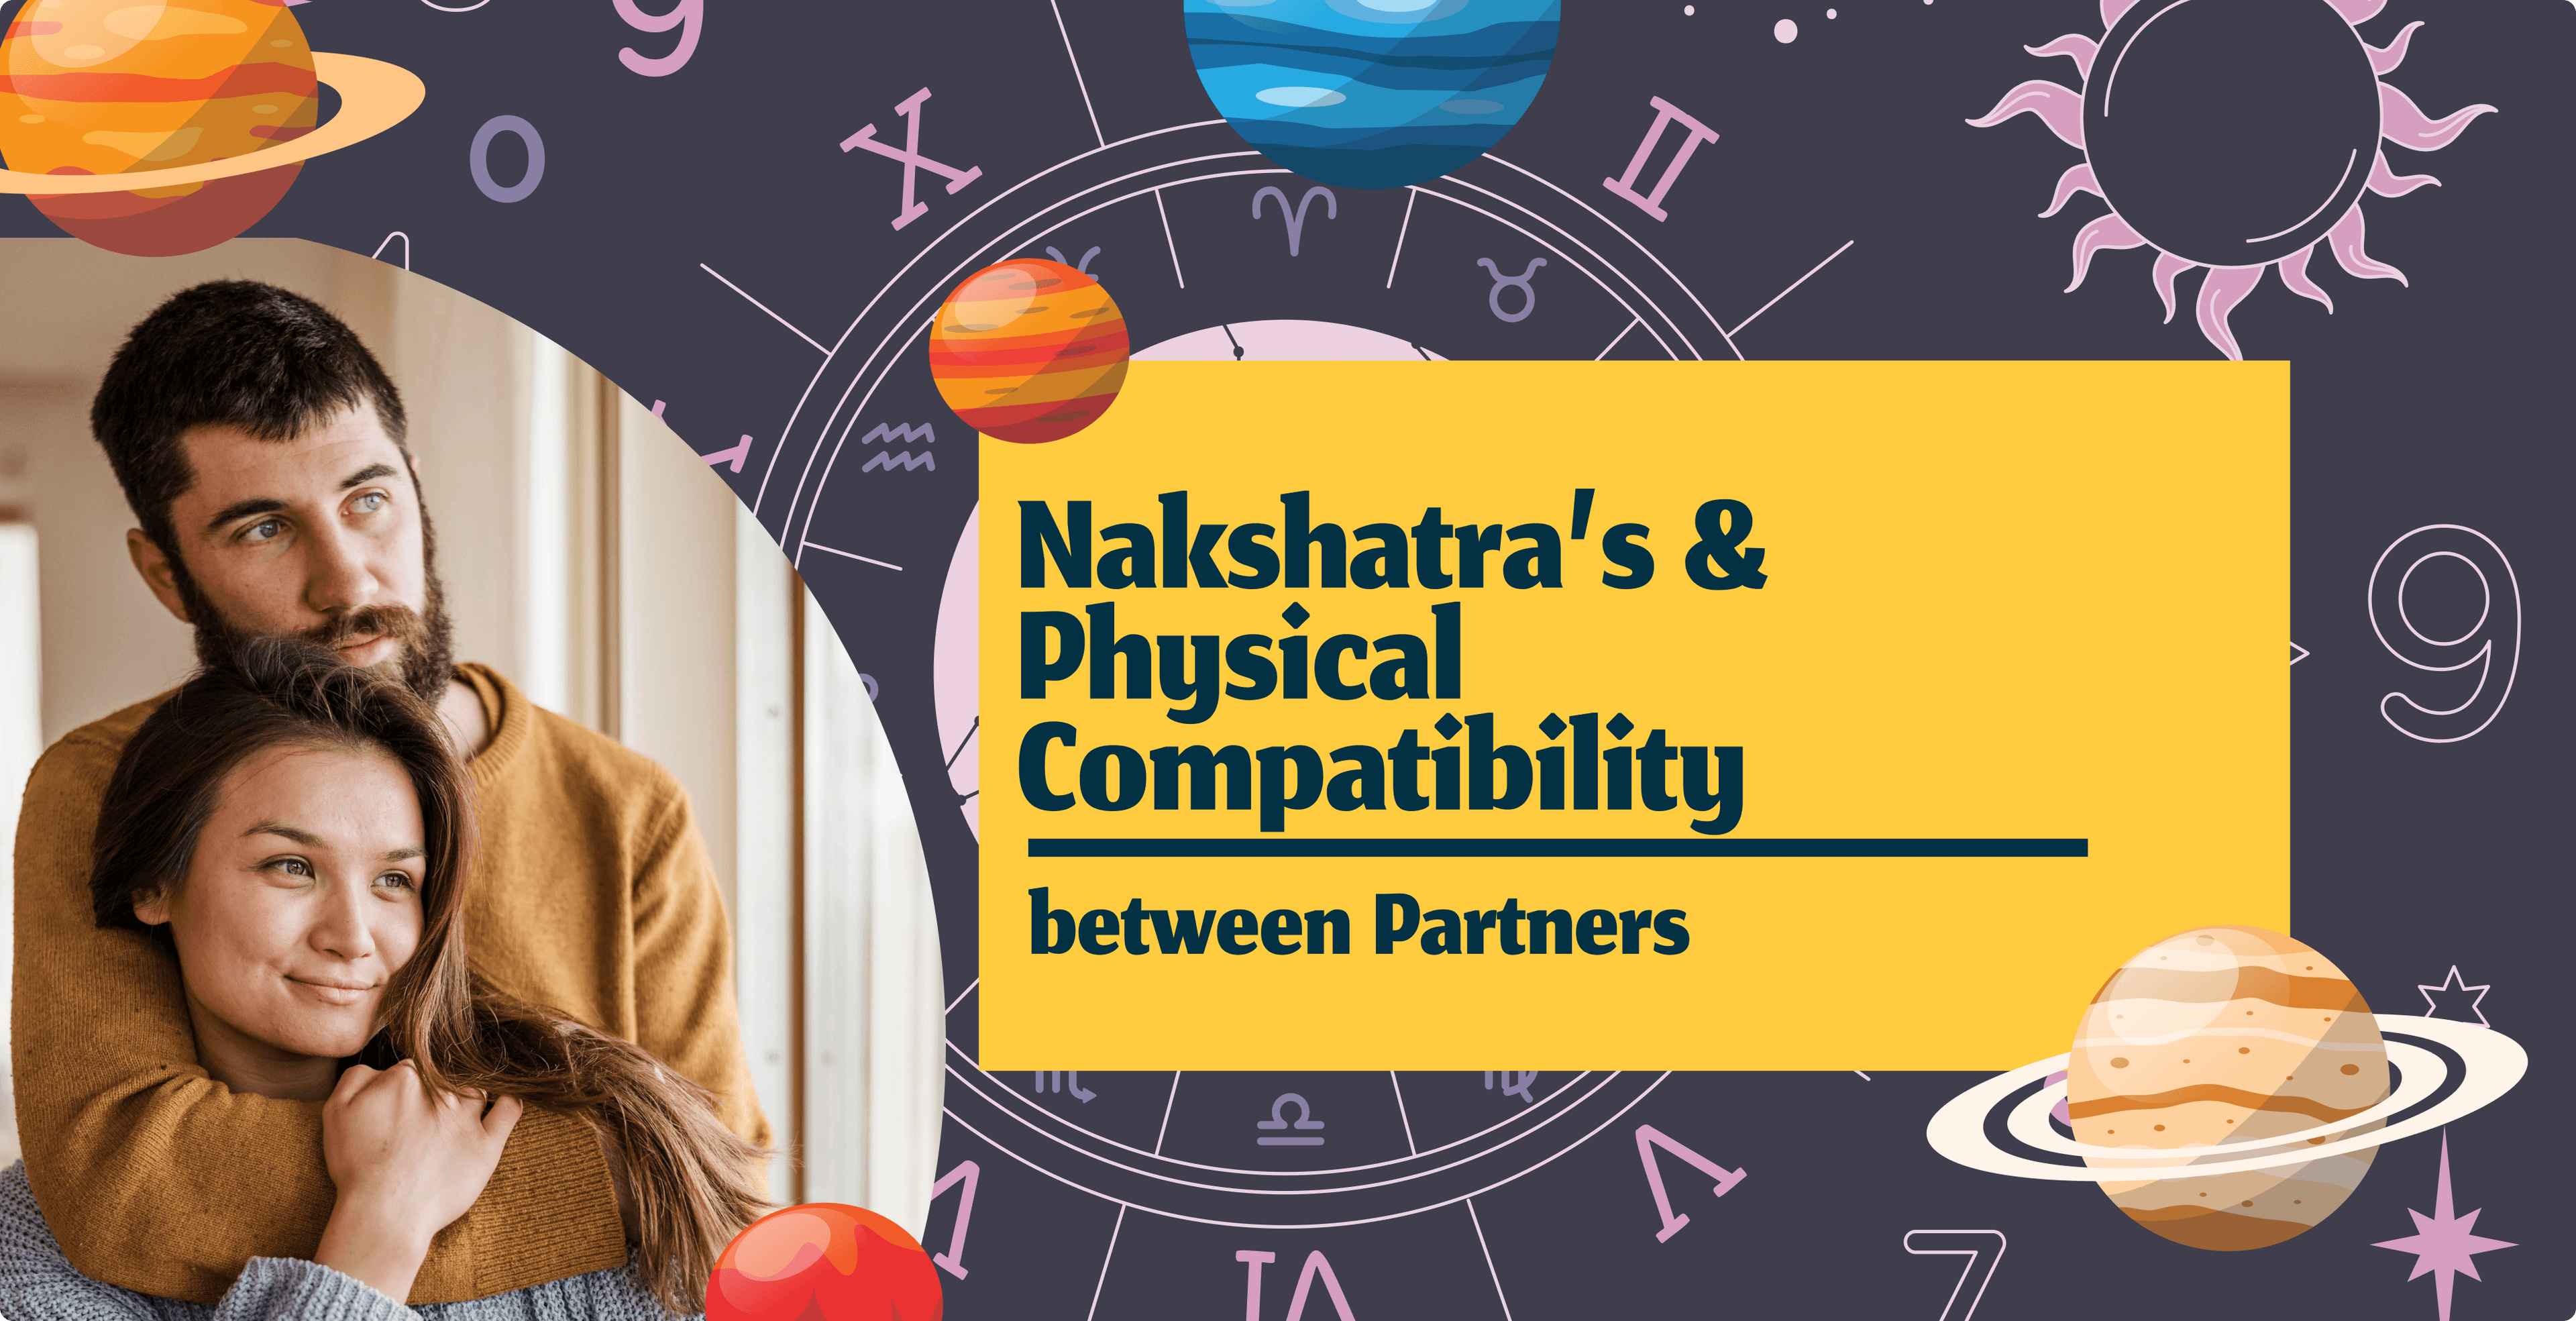 How does Yoni (Physical Compatibility) Play a Significant Role in Compatibility Between Partners?